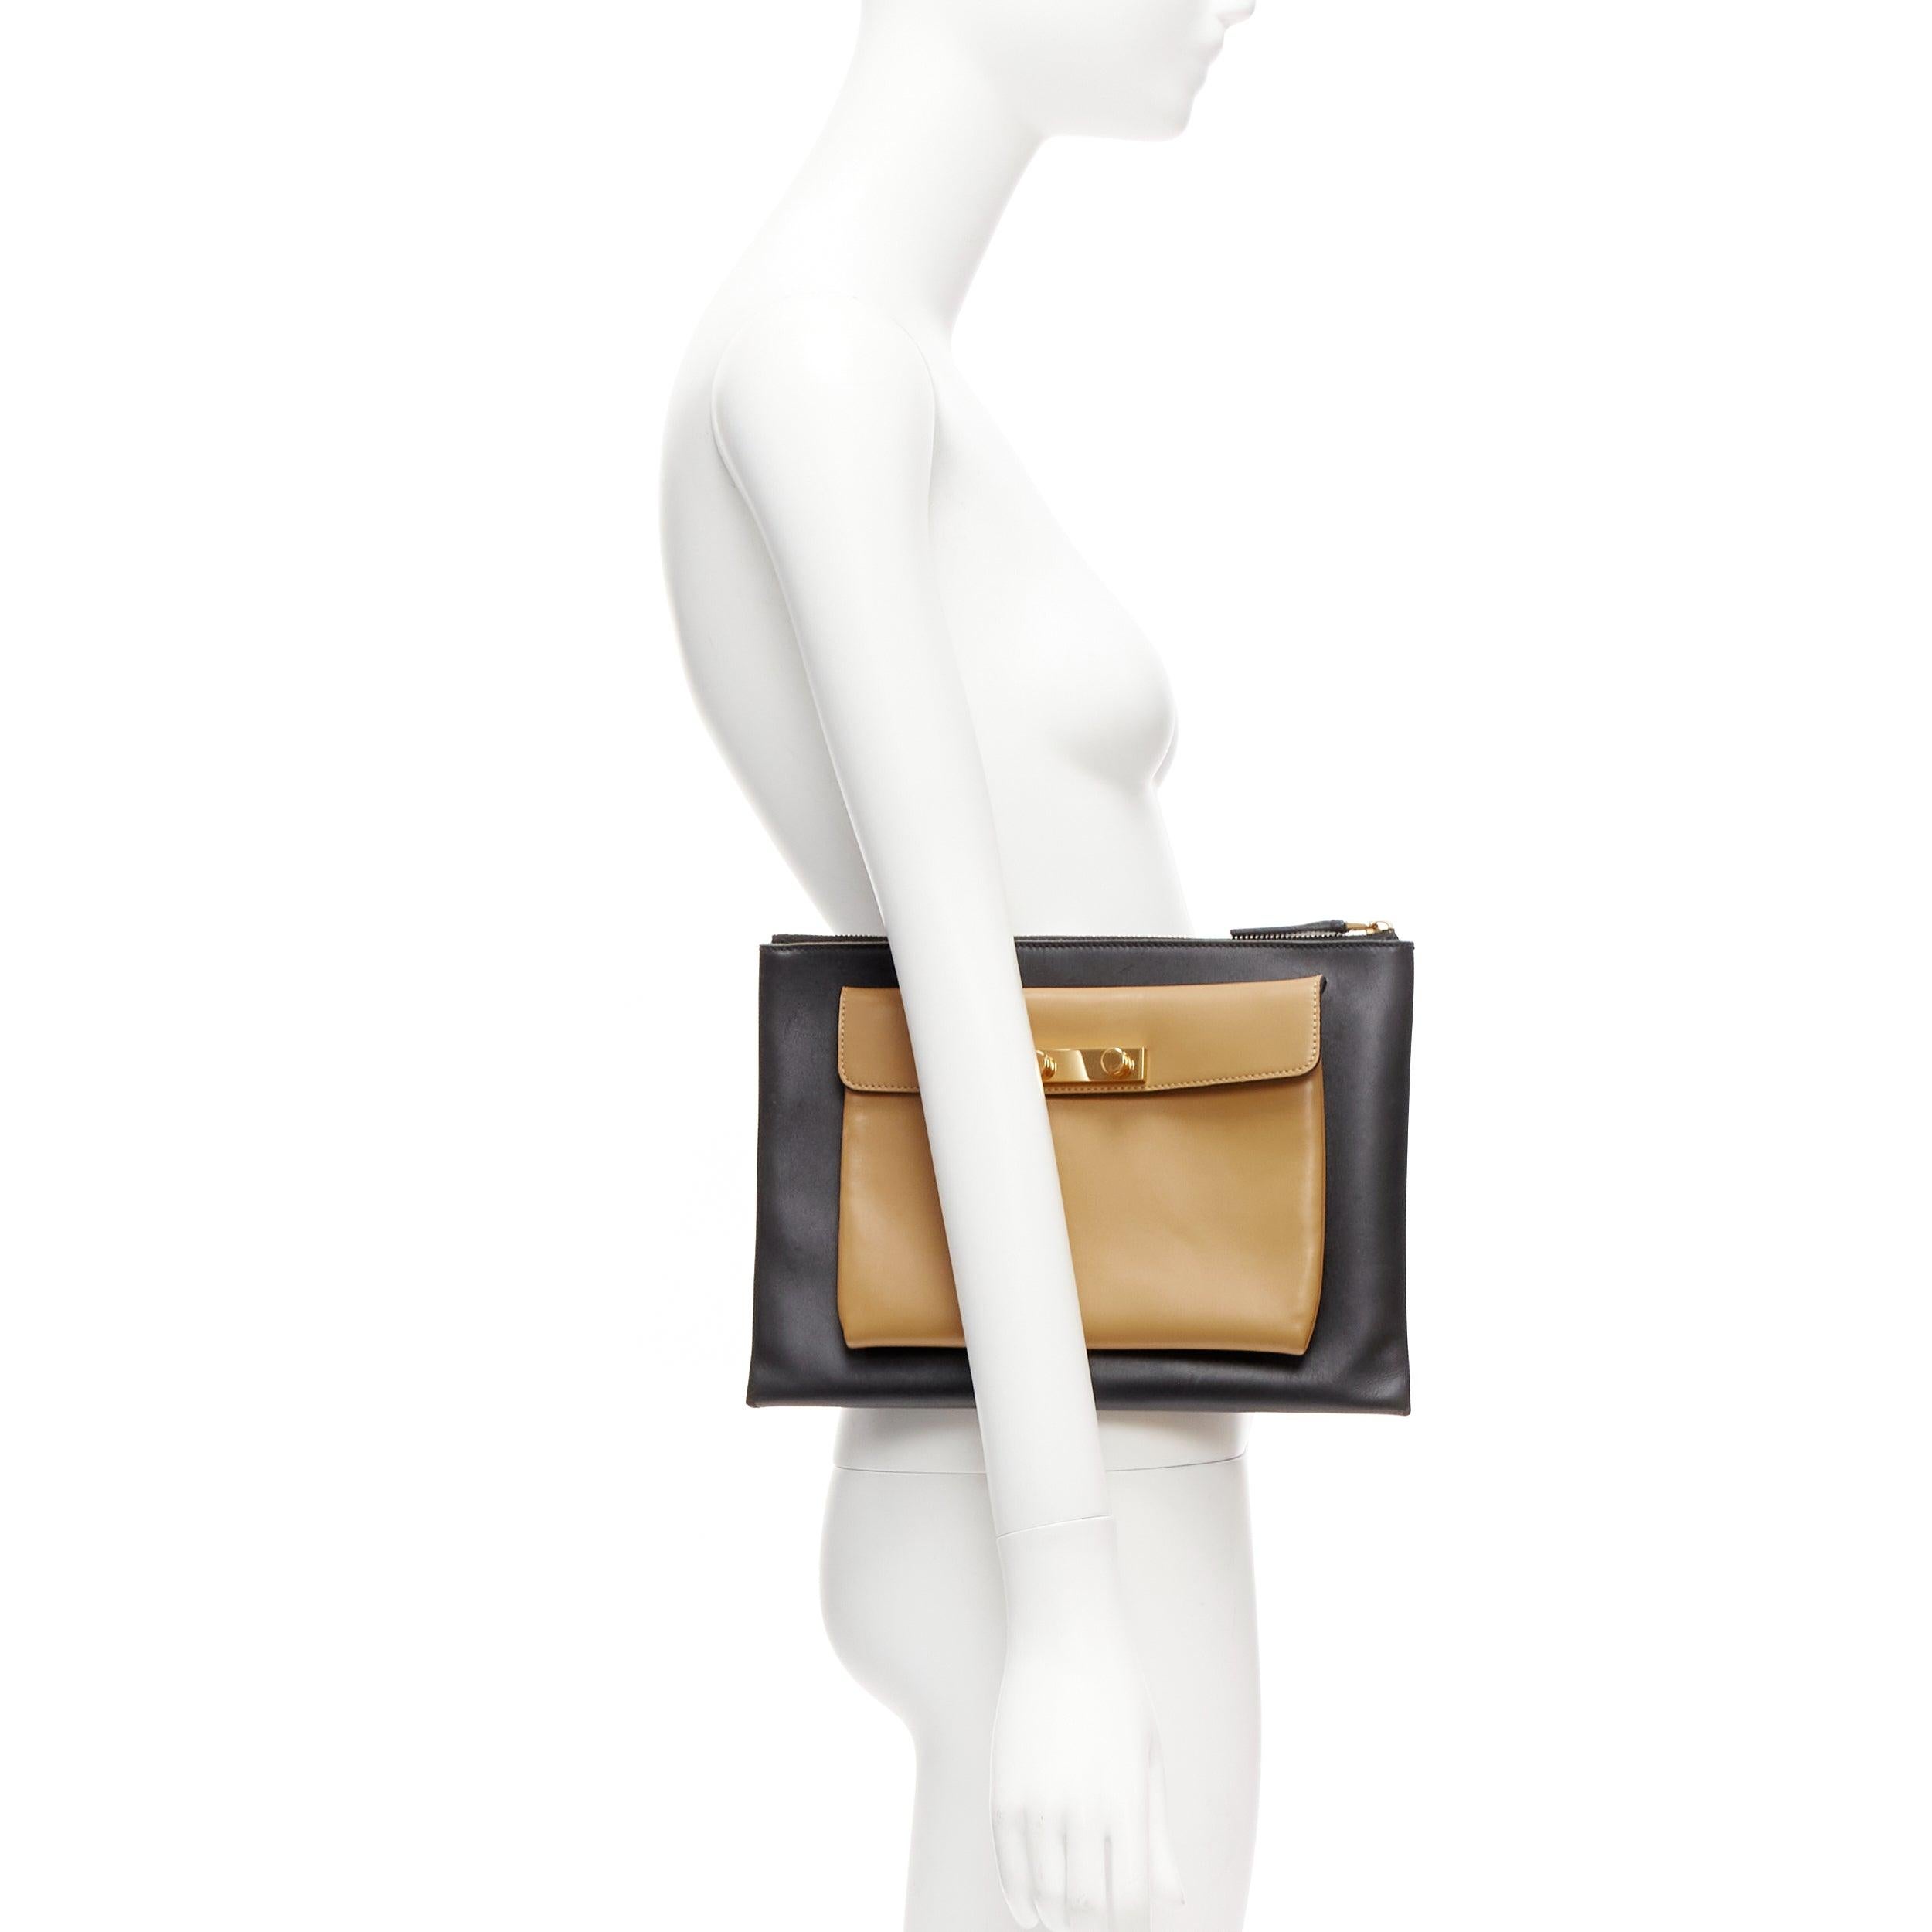 MARNI beige black smooth leather gold stud buckle dual oversized zip clutch bag
Reference: CELG/A00411
Brand: Marni
Material: Leather, Metal
Color: Black, Nude
Pattern: Solid
Closure: Zip
Lining: Black Fabric
Made in: Italy

CONDITION:
Condition: